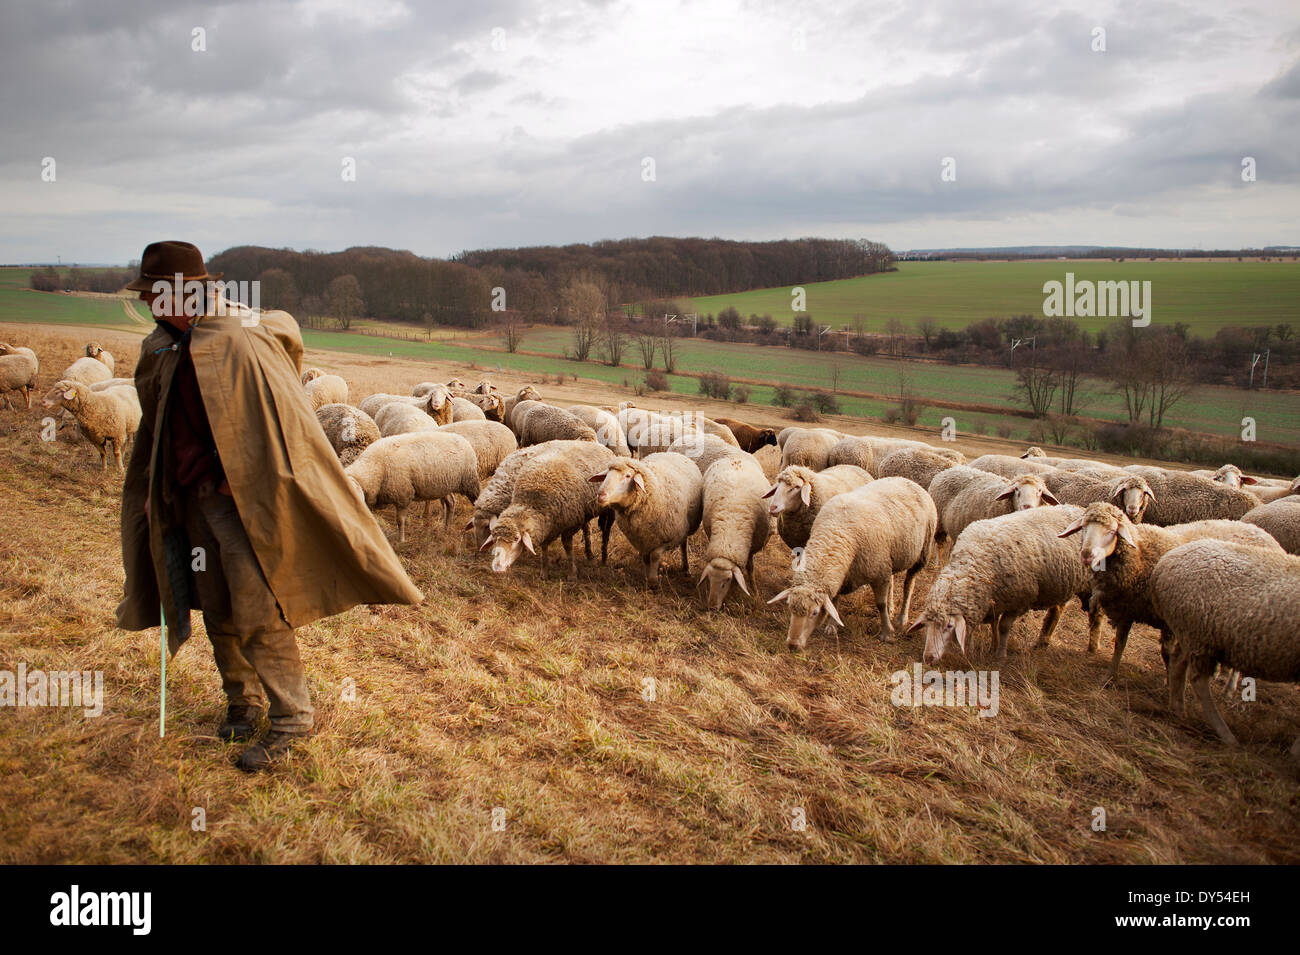 a-shepherd-leads-his-sheep-up-a-hill-in-the-countryside-weimar-germany-DY54EH.jpg